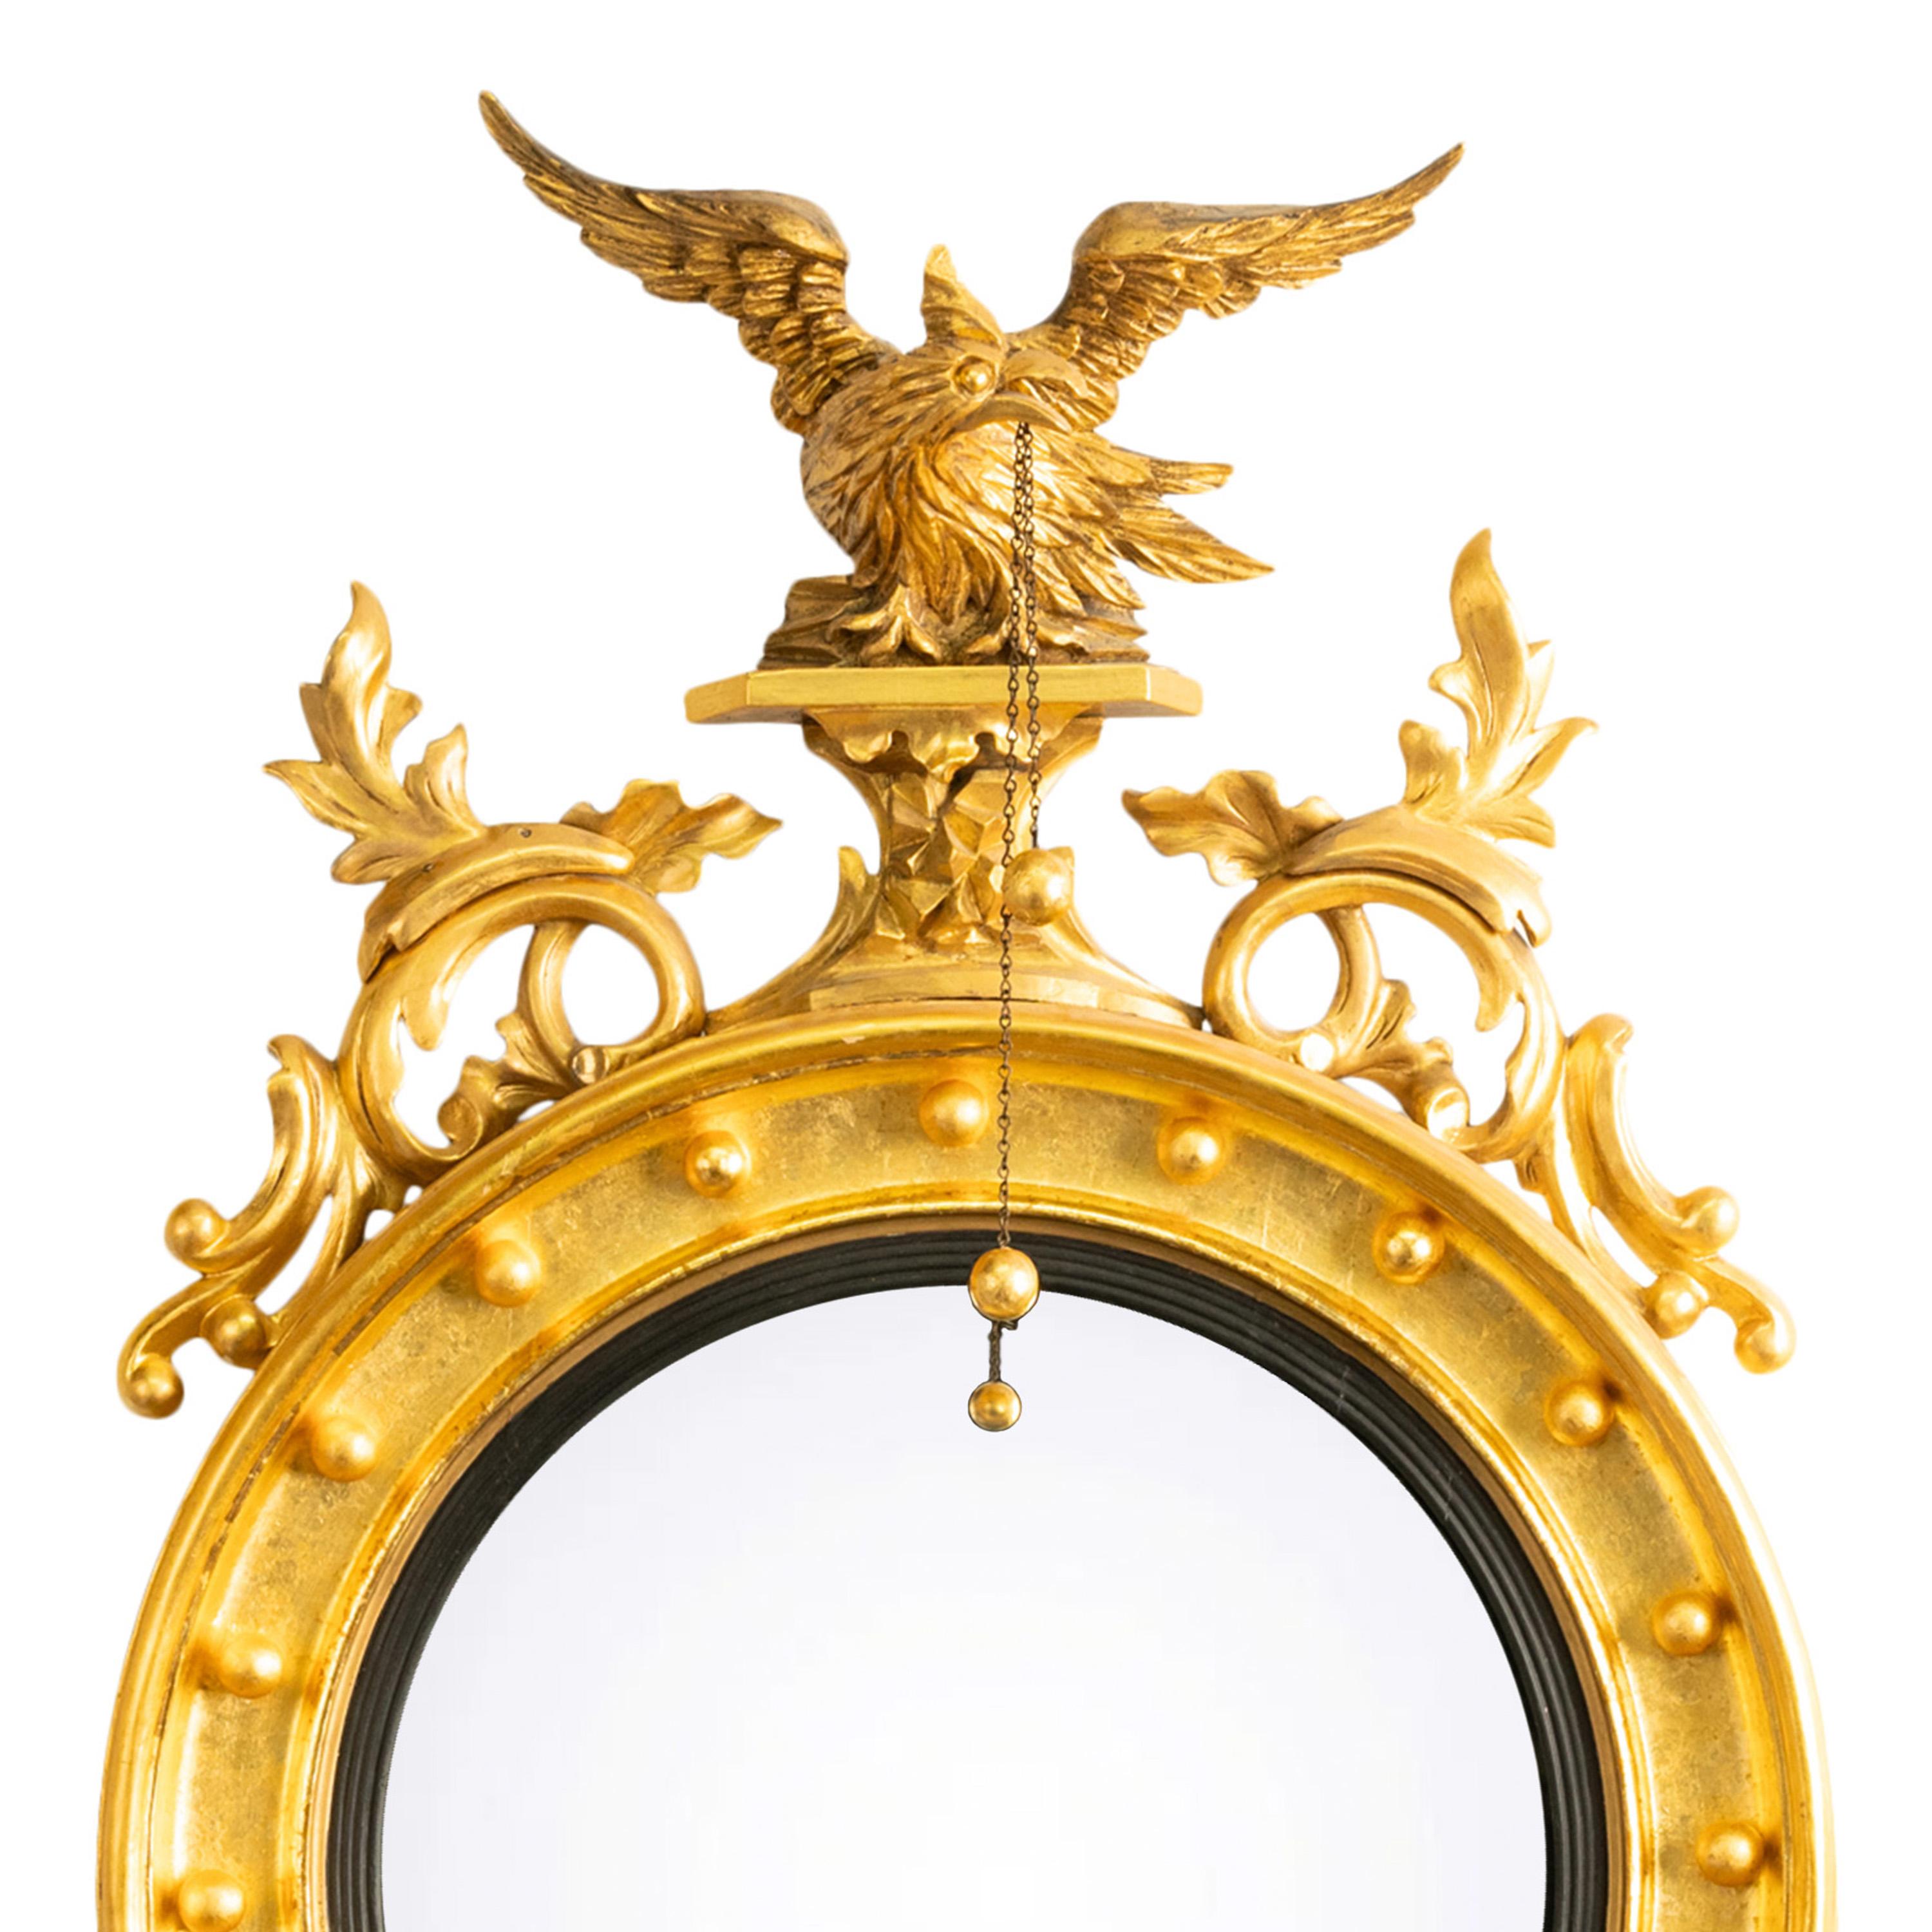 Antique Early 19thC American Federal Period Convex Gilt Wood Eagle Mirror 1820 In Good Condition For Sale In Portland, OR